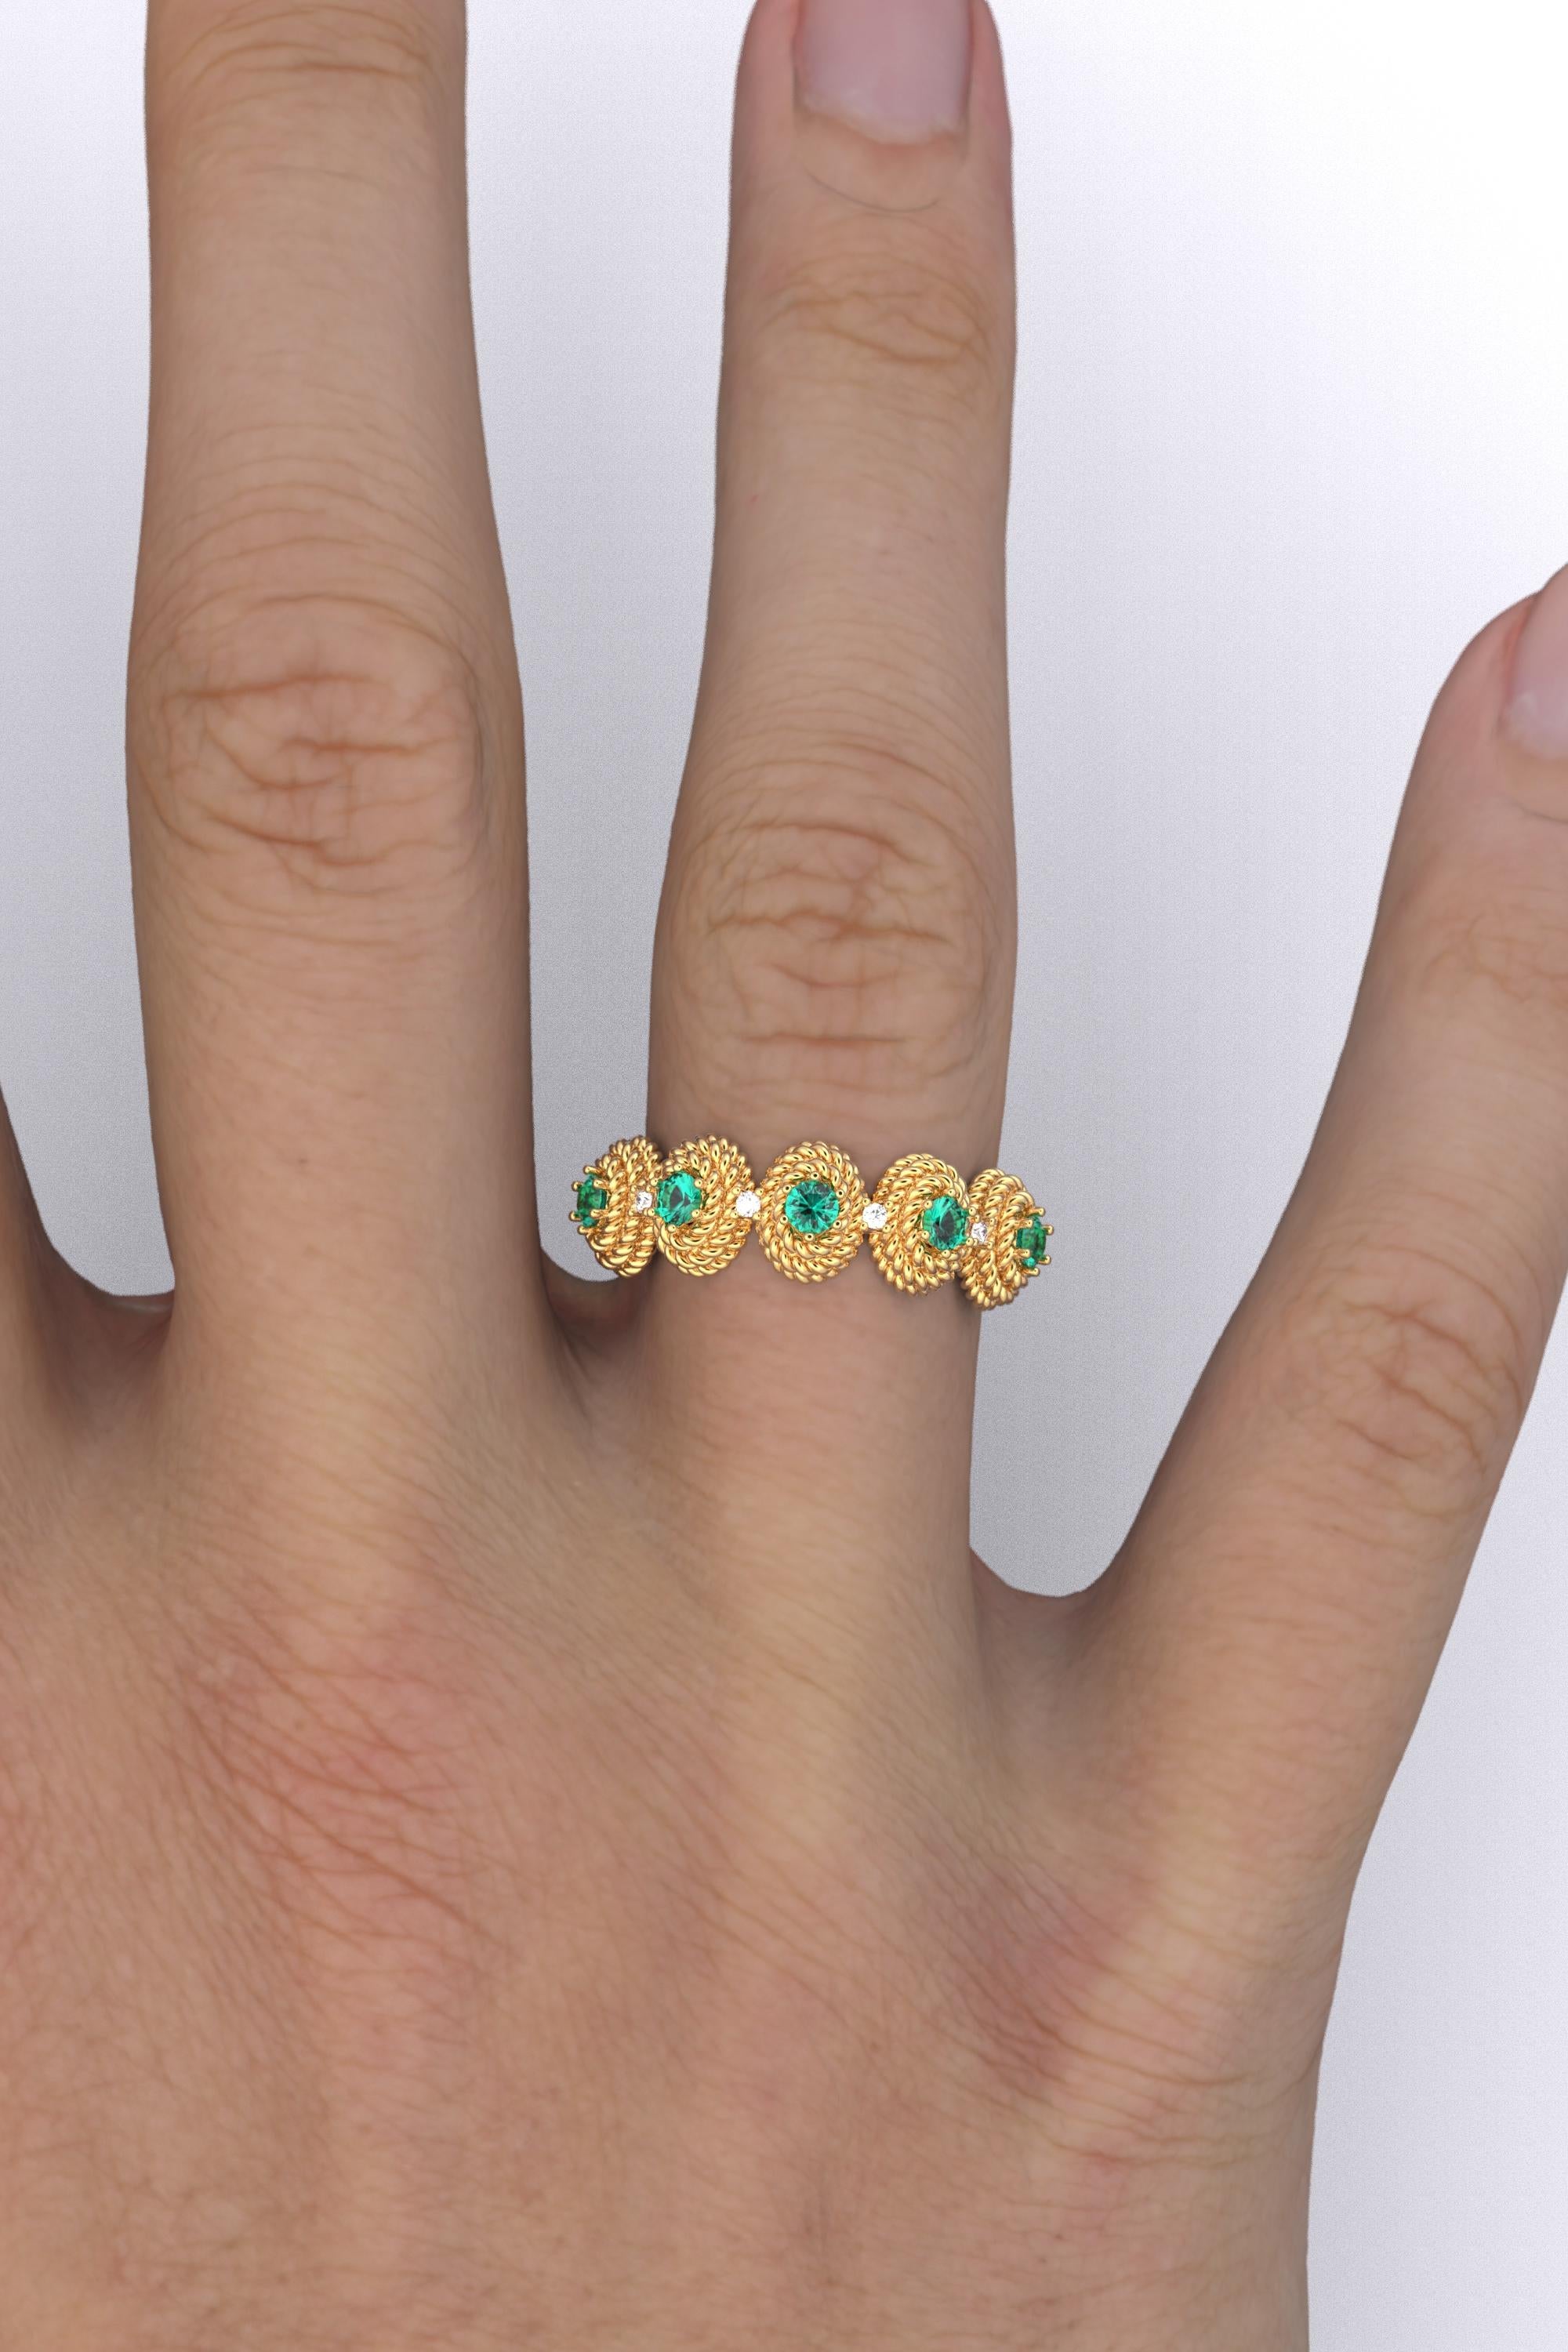 For Sale:  Emerald and Diamond Ring Made in Italy in 14k Gold by Oltremare Gioielli 8